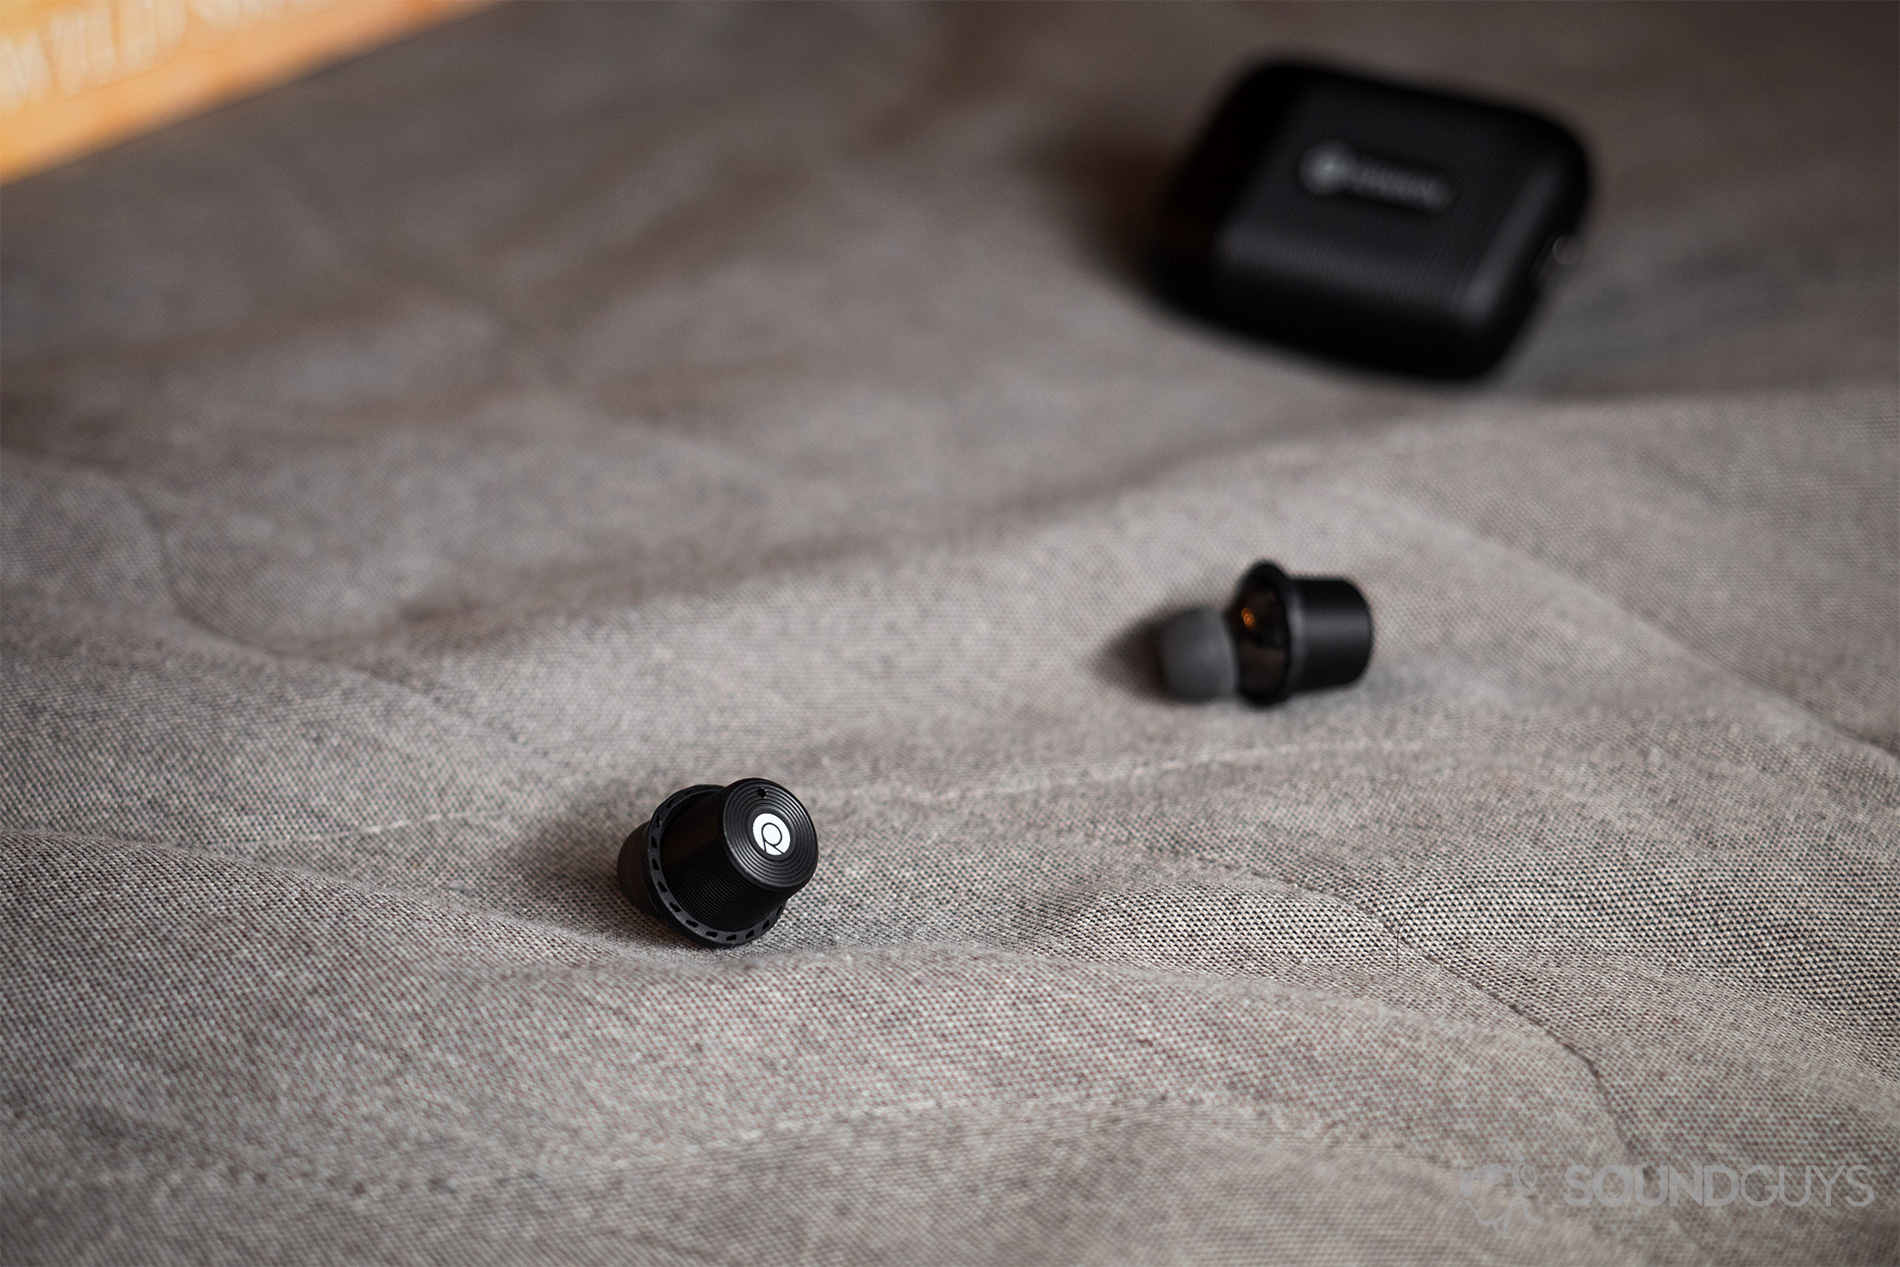 Rowkin Ascent Micro: The earbuds resting on a couch with the case in the background.